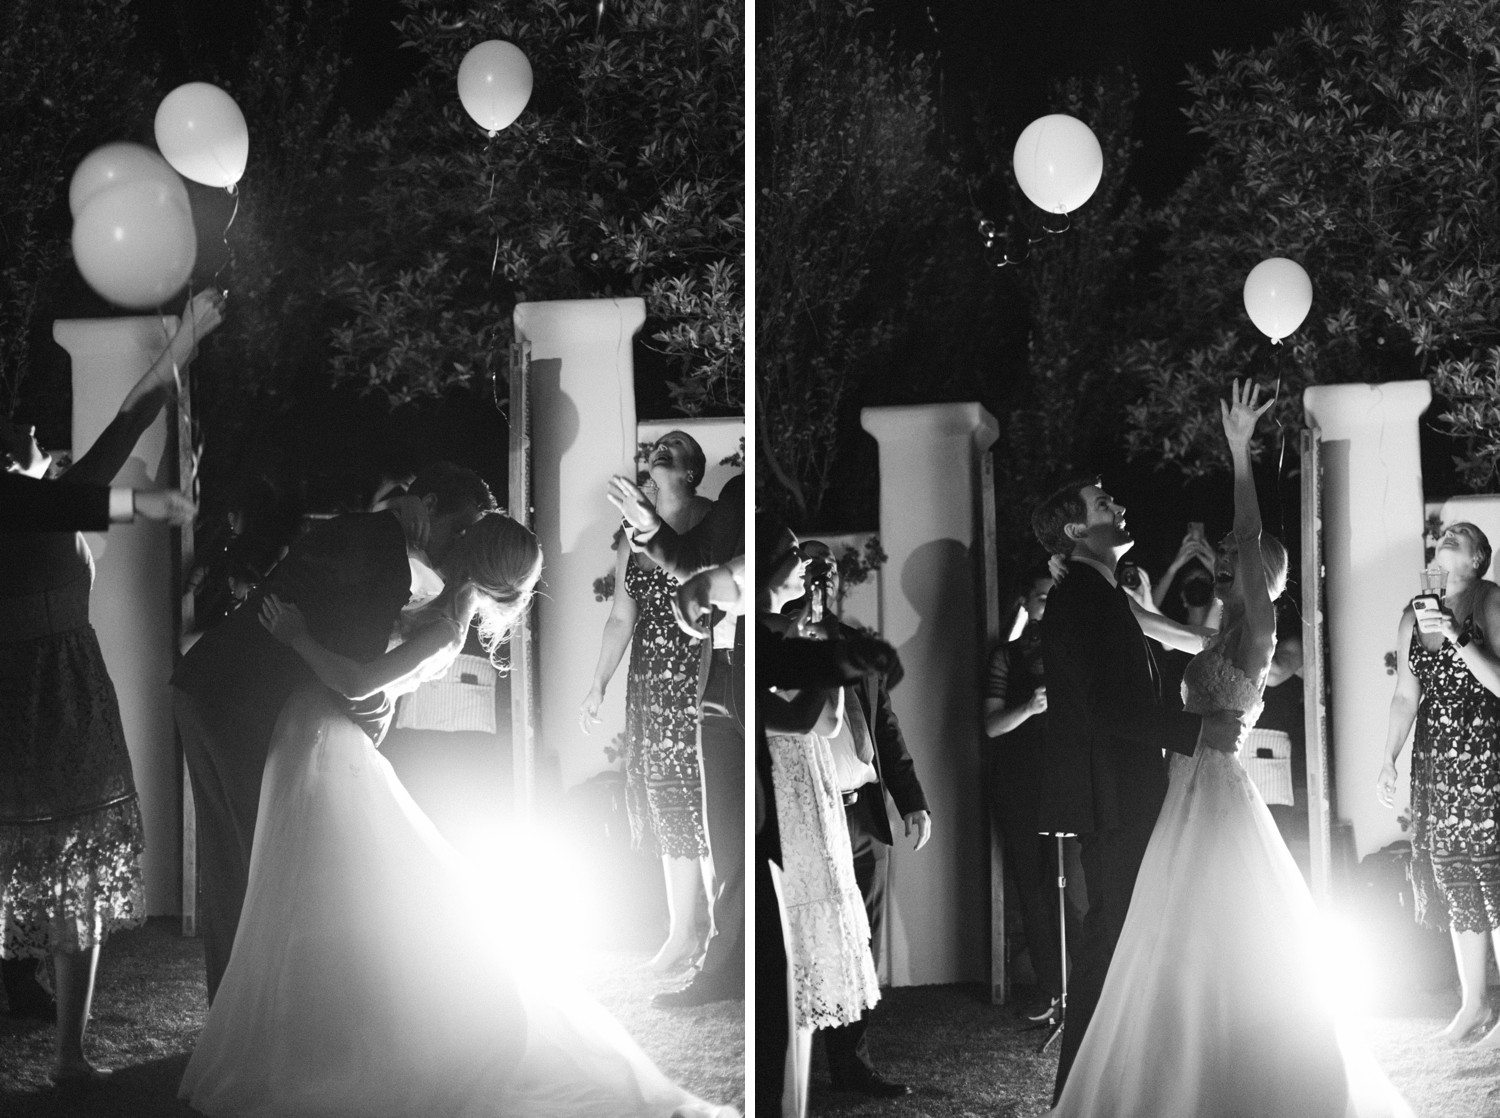 Wedding Exit with Balloons